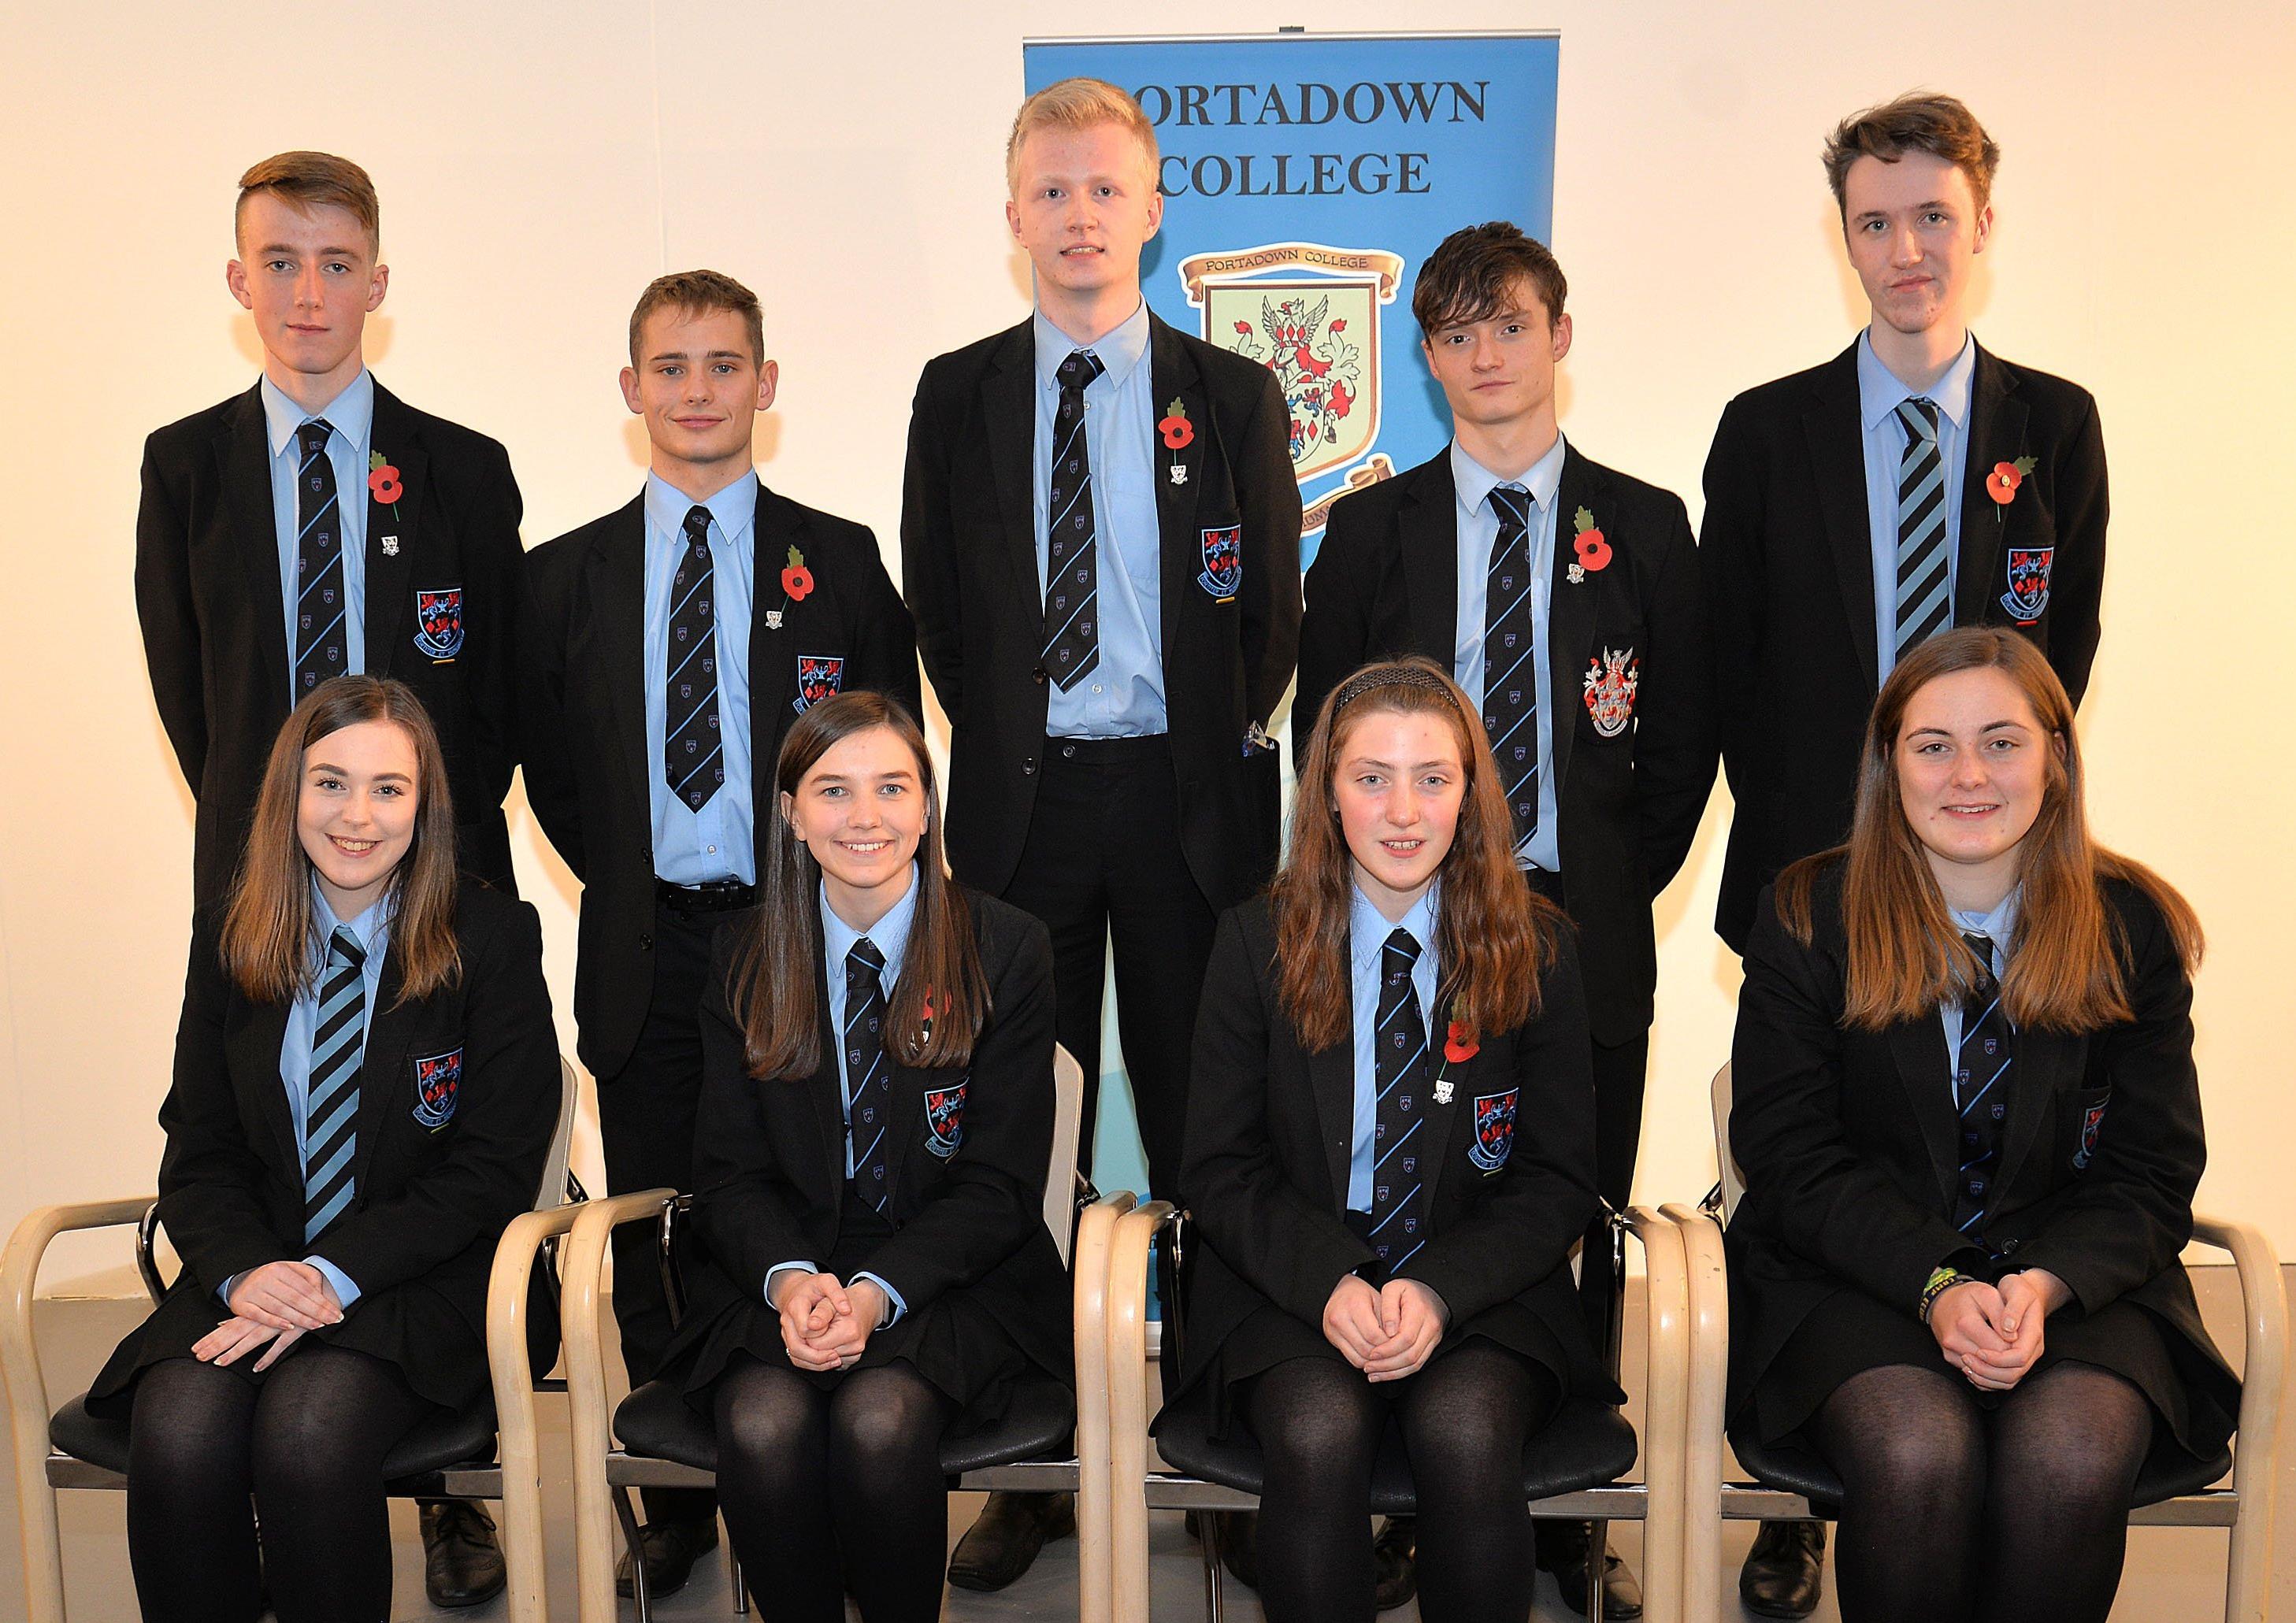 Portadown College students who received awards for Excellent Performance at 'AS' level.INPT44-221.